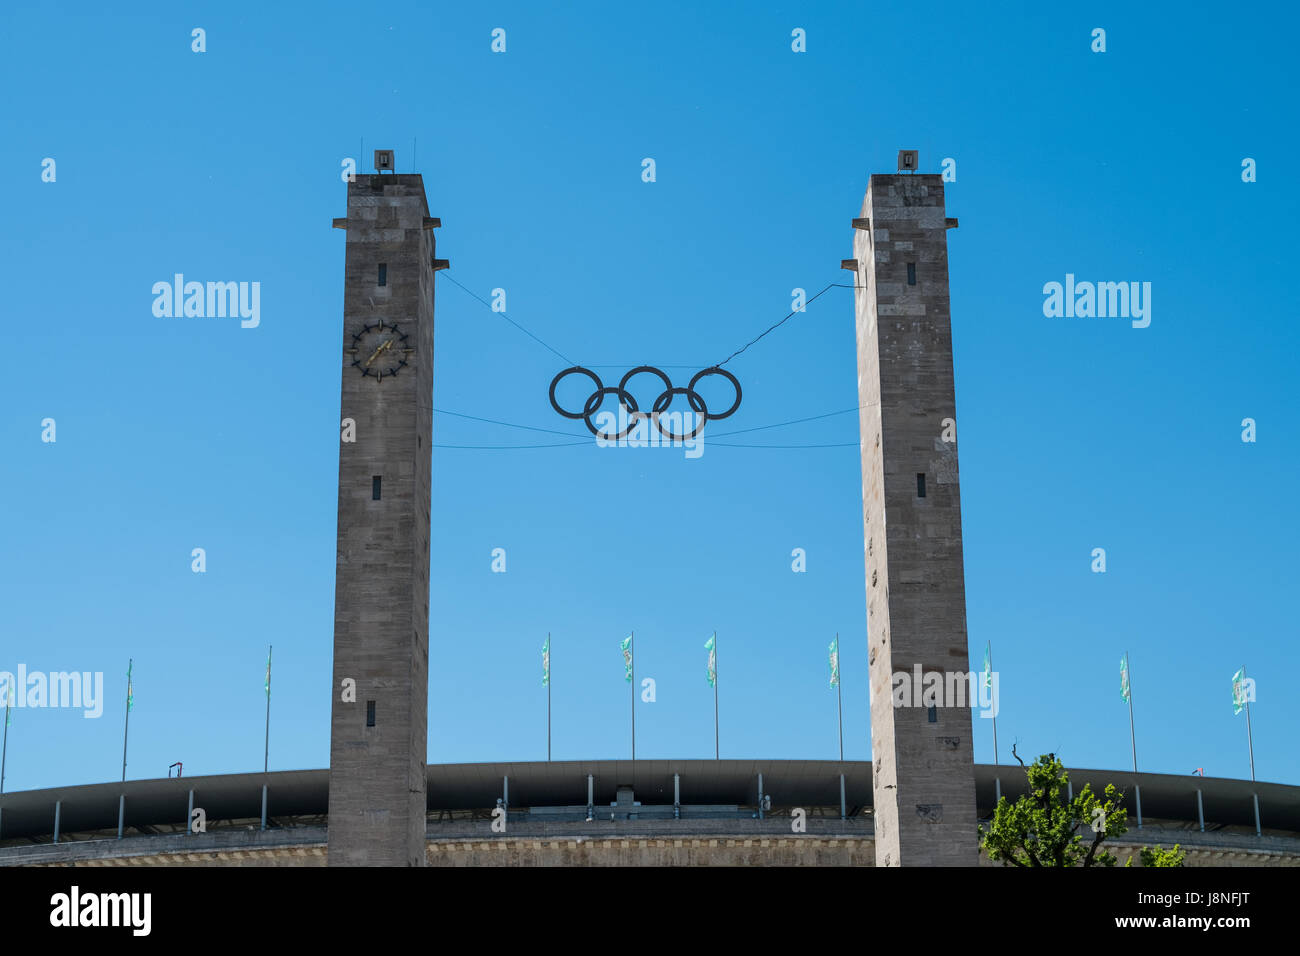 Berlin, Germany - may 27, 2017: The Olympic Rings at Olympiastadion (Olympic Stadium) in Berlin, Germany Stock Photo